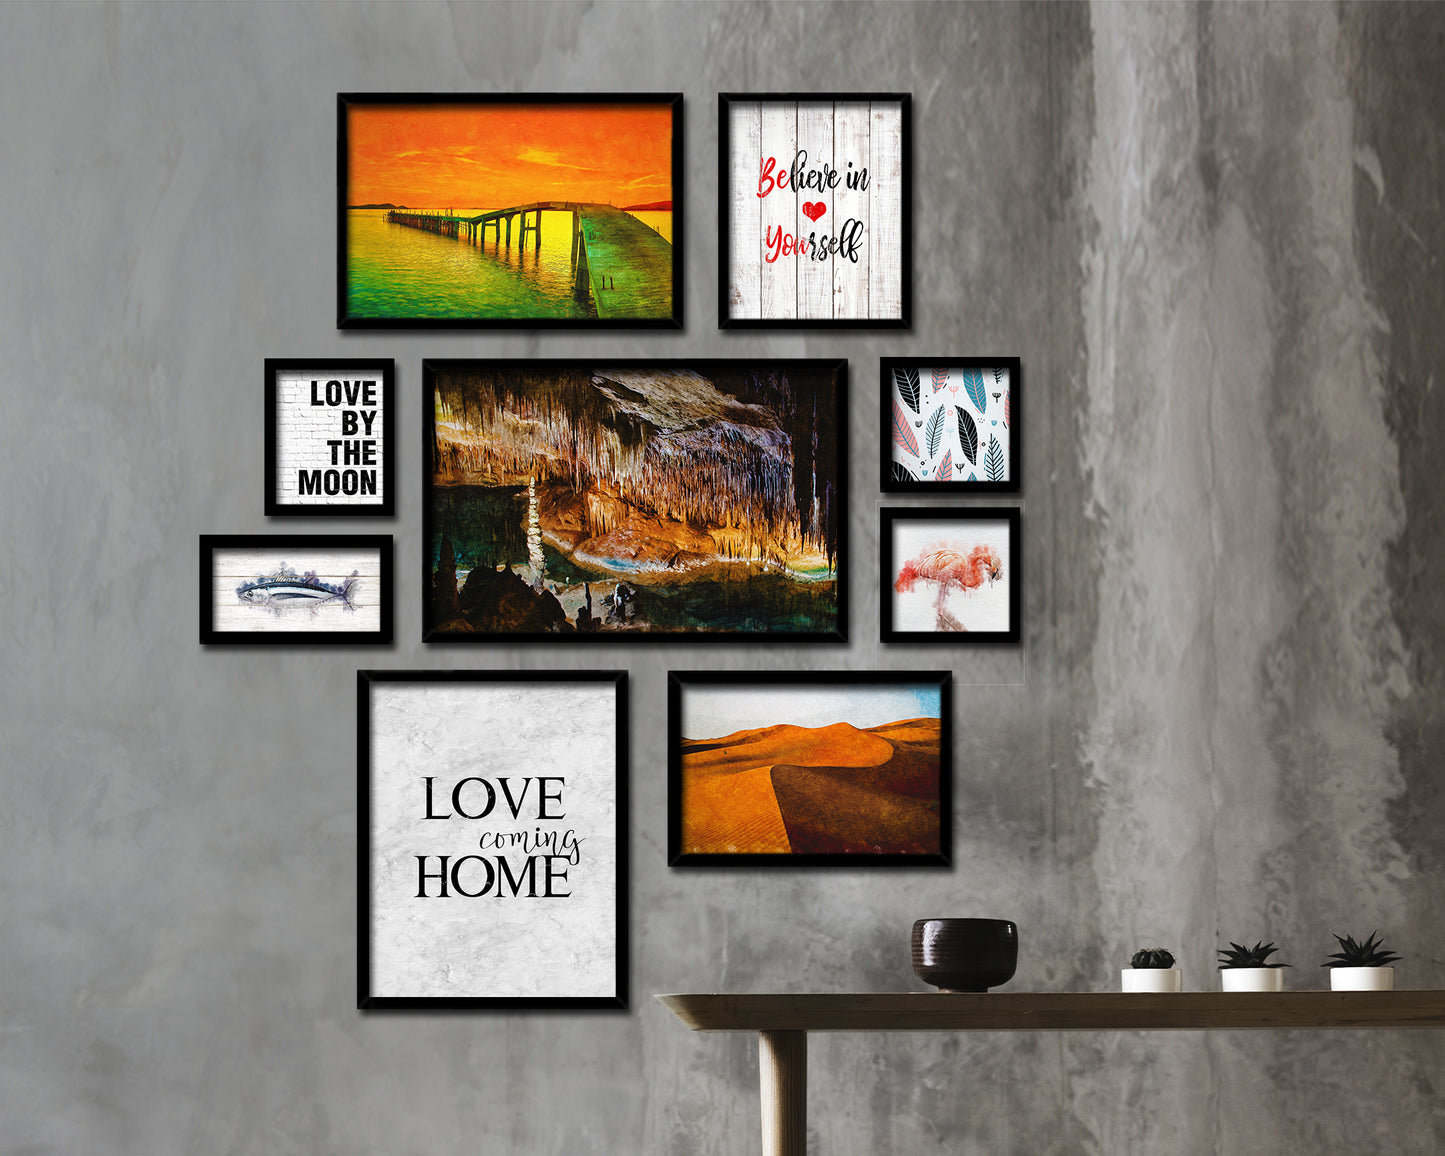 Love coming home Quote Framed Print Wall Art Decor Gifts